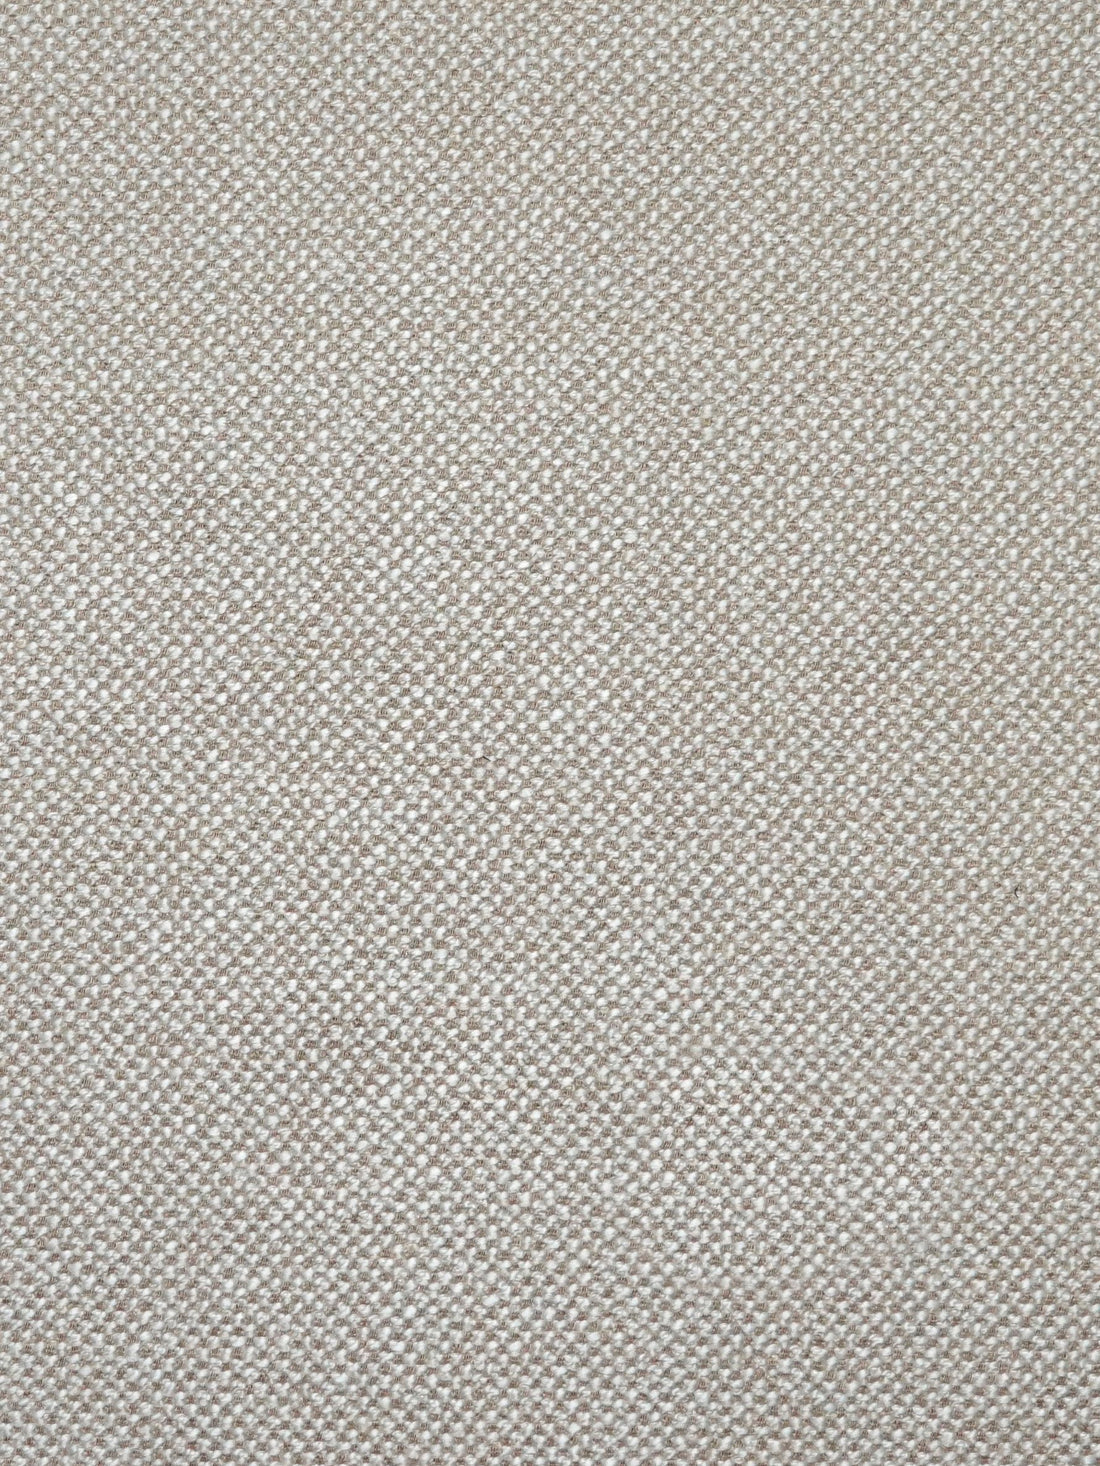 City Tweed fabric in toasted oat color - pattern number SC 000127249 - by Scalamandre in the Scalamandre Fabrics Book 1 collection